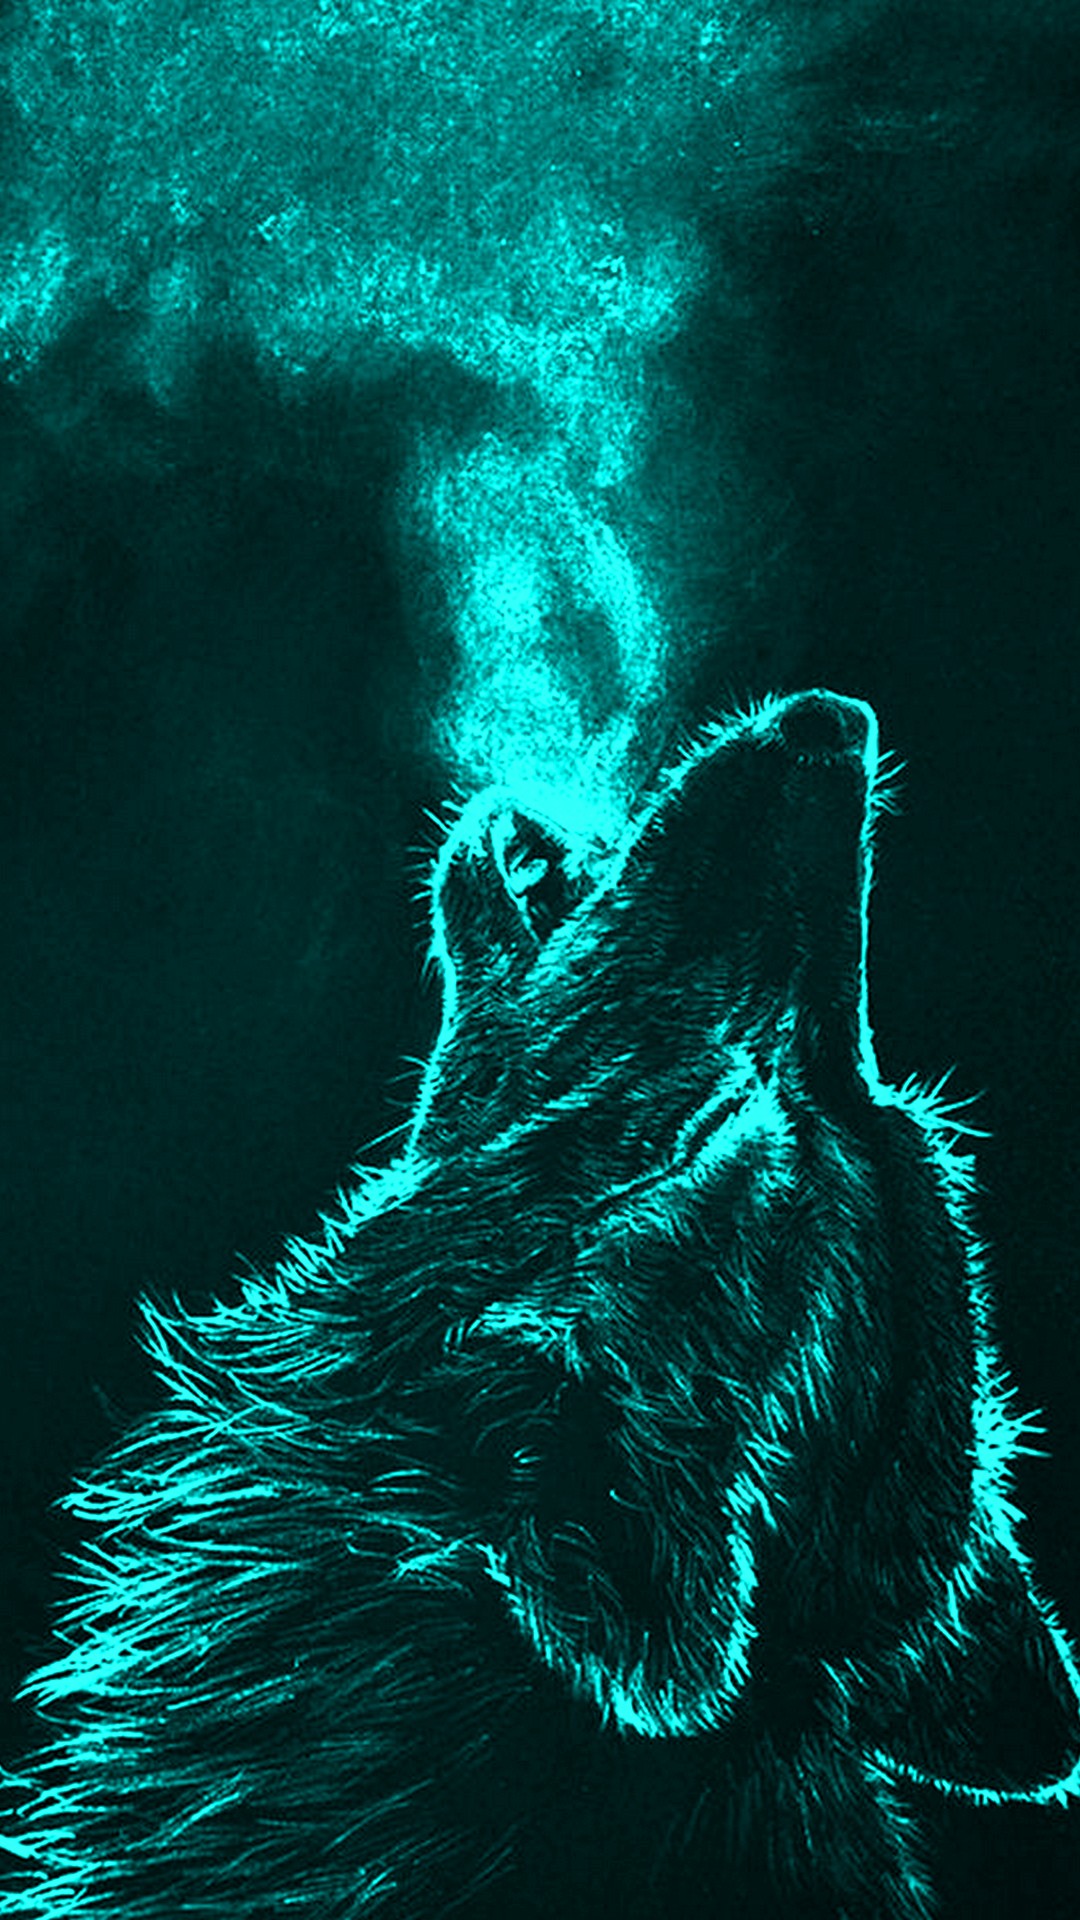 Cool Wolf Wallpaper For Android With high-resolution 1080X1920 pixel. You can use this wallpaper for your Android backgrounds, Tablet, Samsung Screensavers, Mobile Phone Lock Screen and another Smartphones device